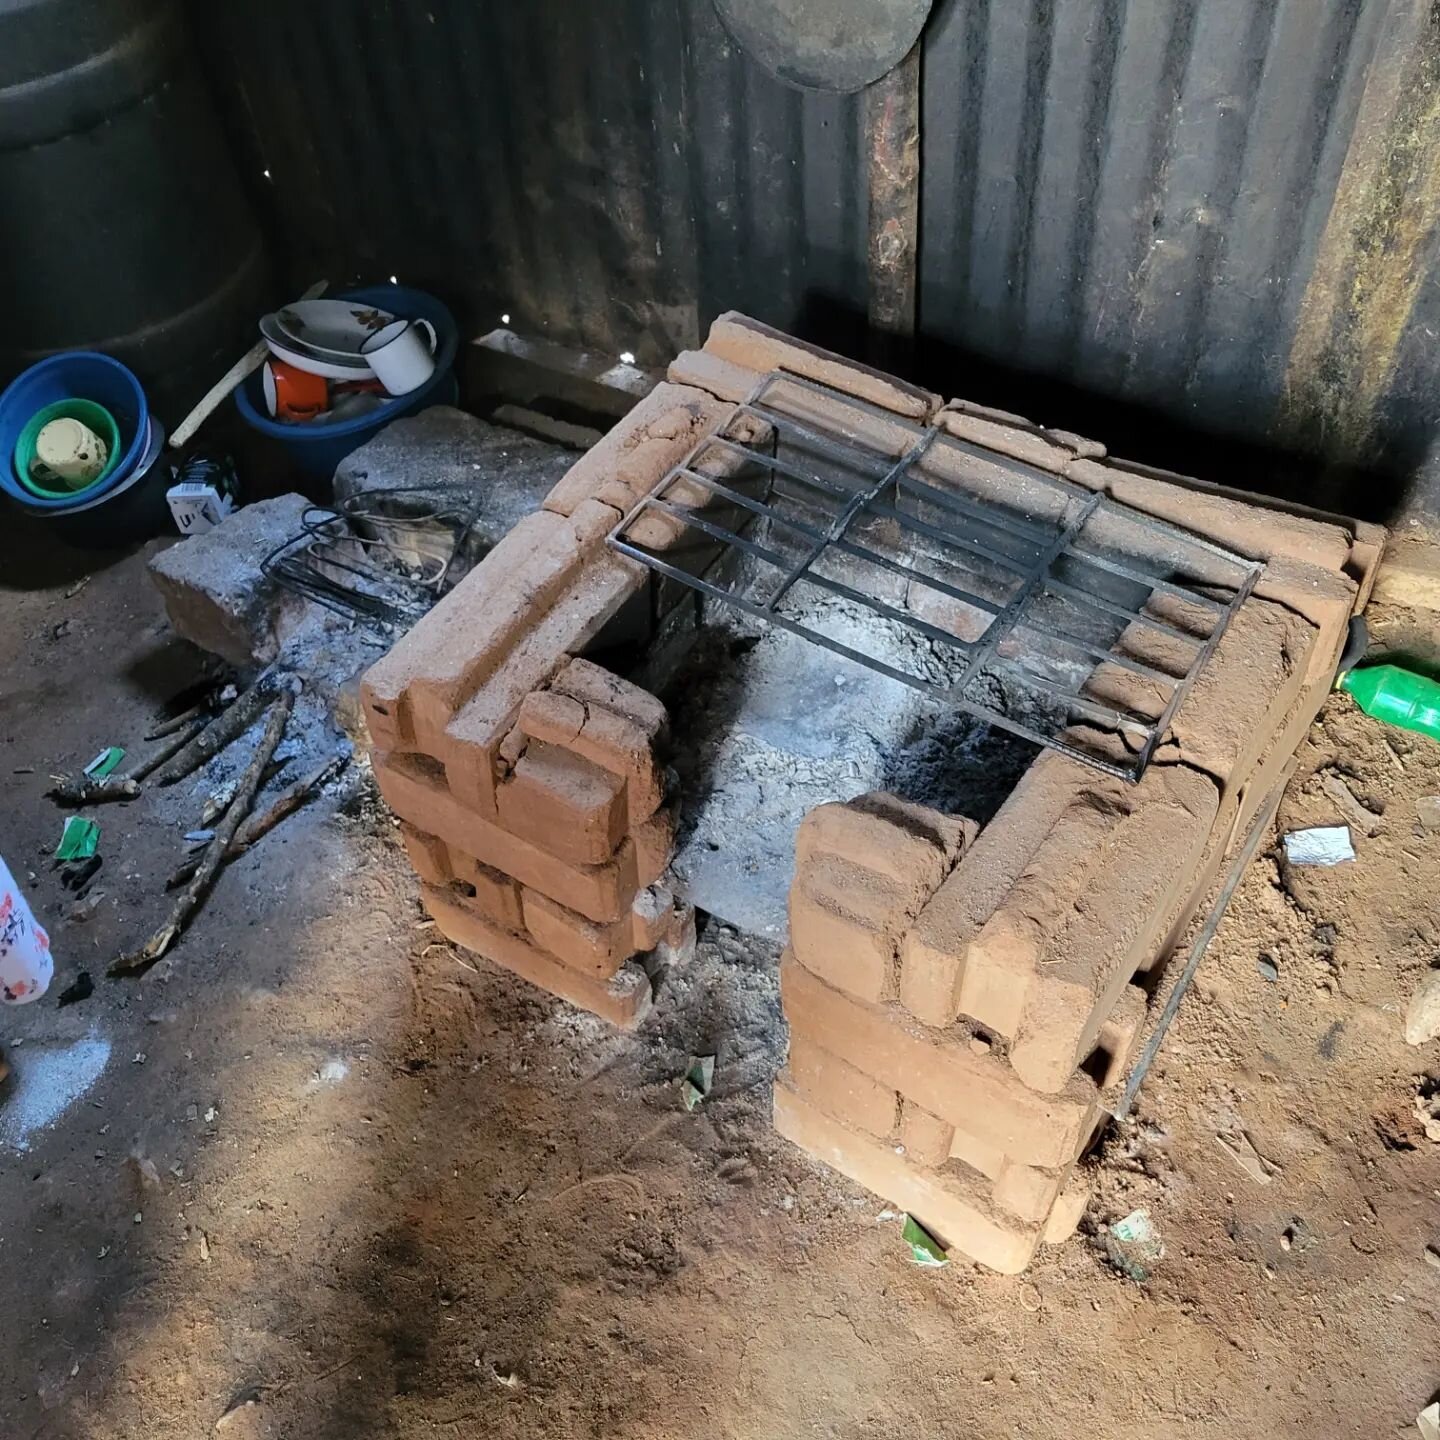 Saving Trees in Kajiado County!
SDF partnered with the Enkolili CBO to install high-efficiency rocket stoves constructed of interlocking compressed earth blocks (ICEB) for 11 widows and 3 school kitchens. The school stoves were used as educational ex